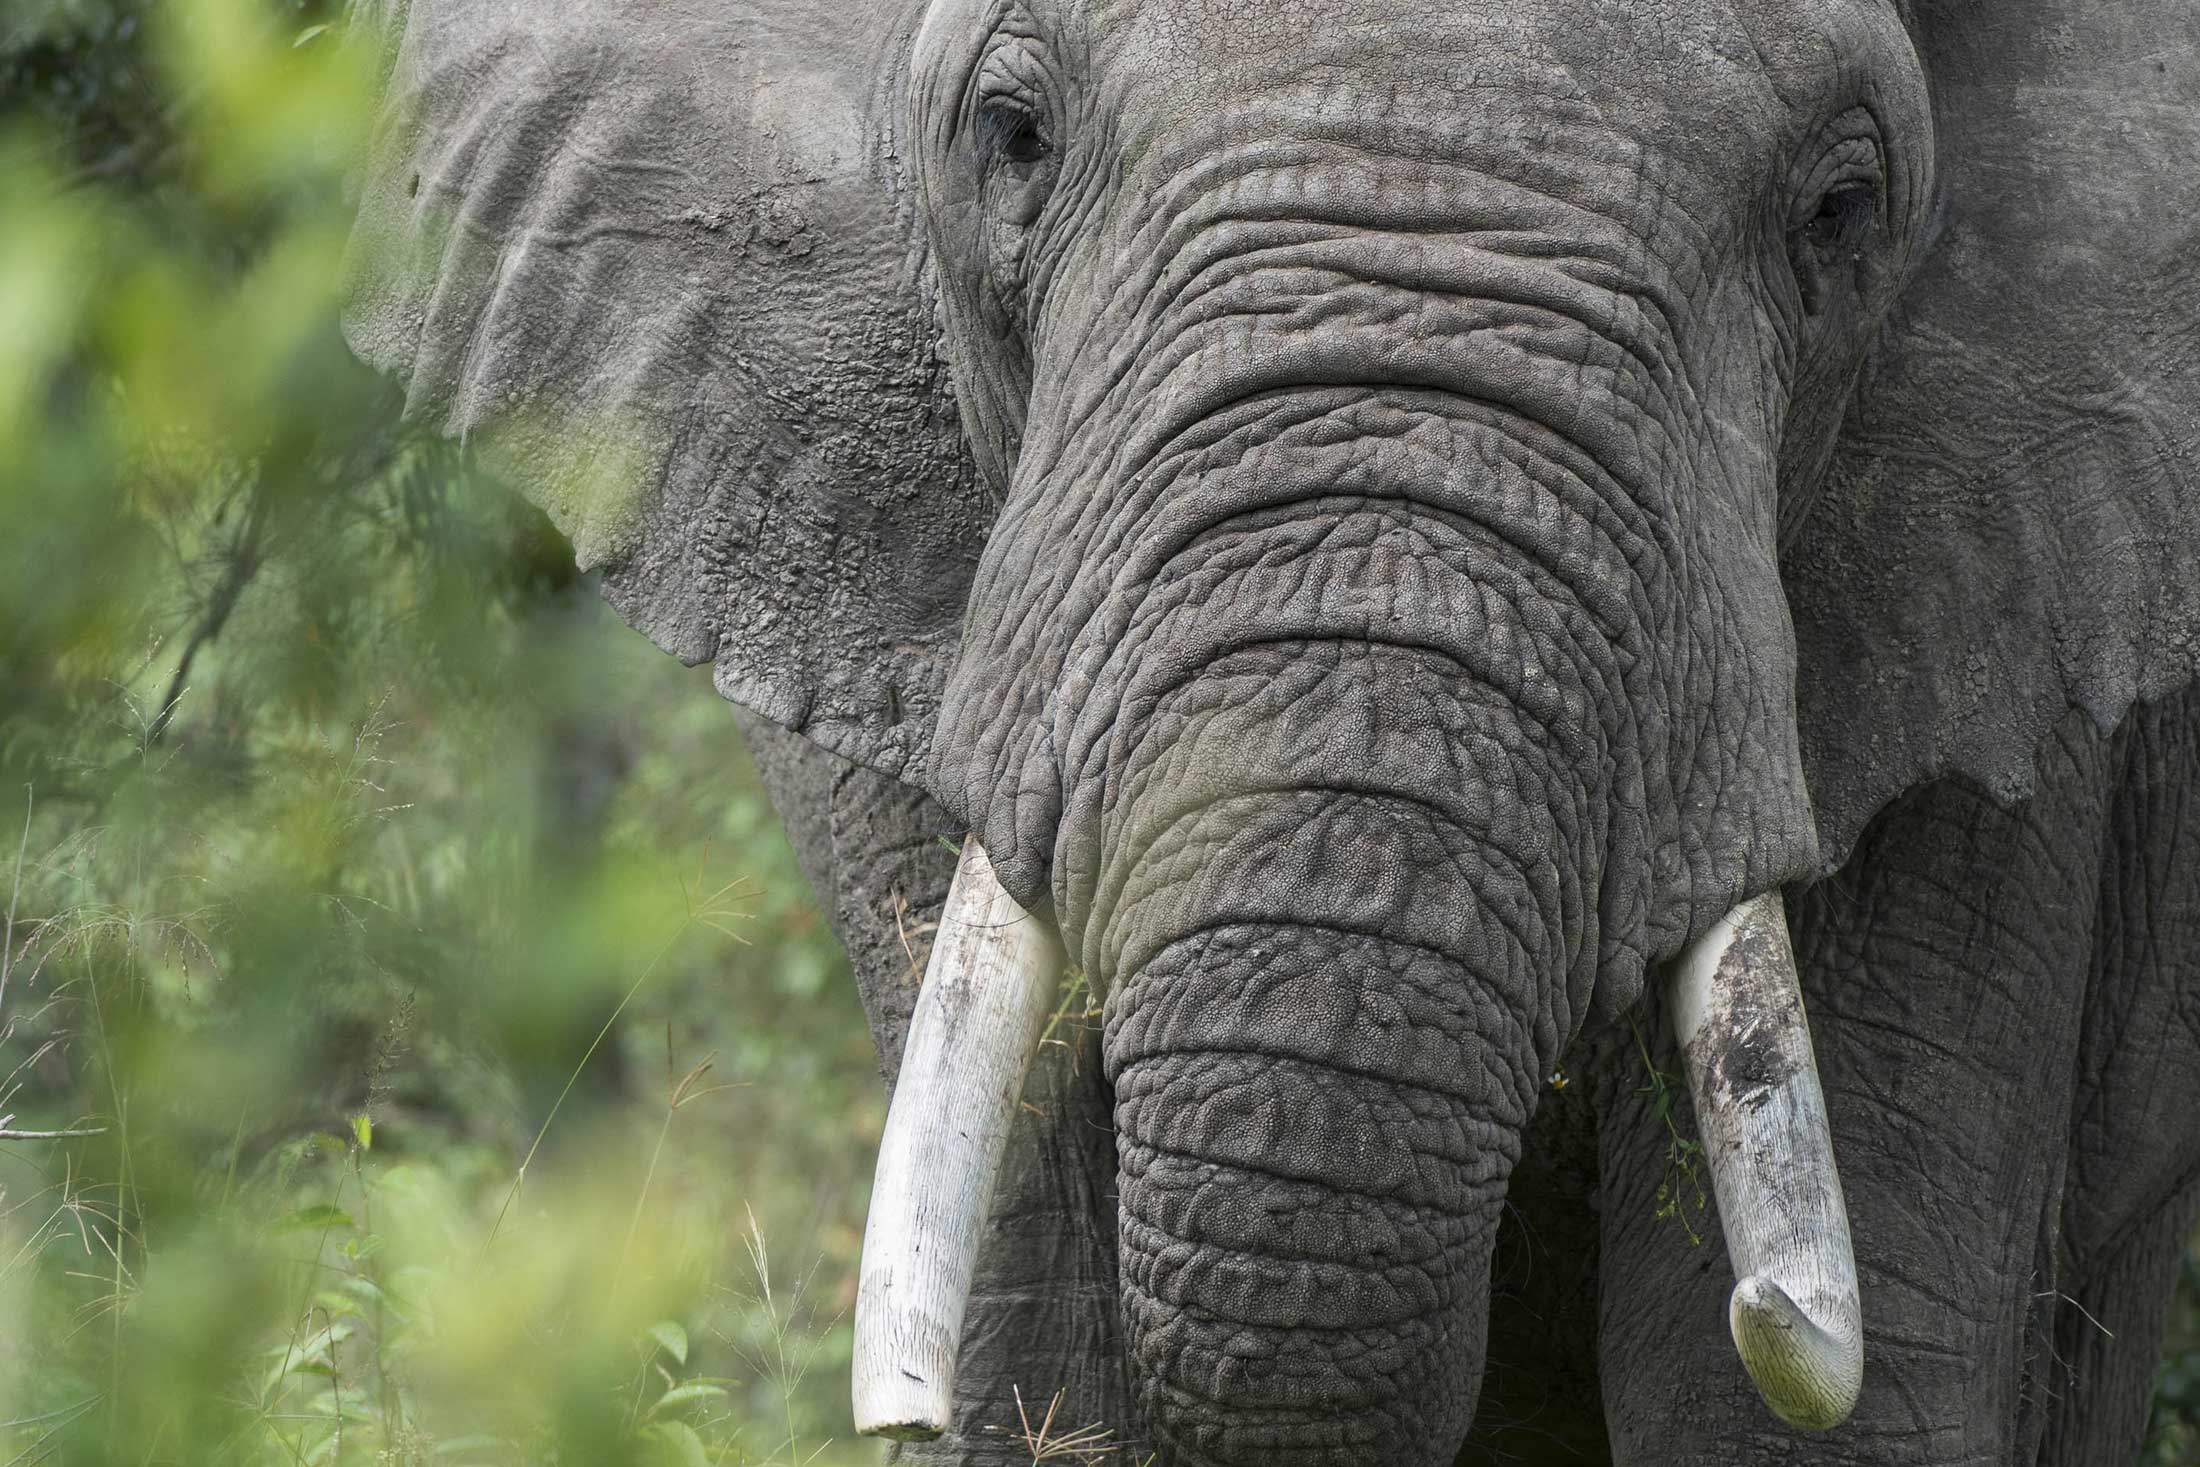 large tusked elephant facing camera with green foliage in the background